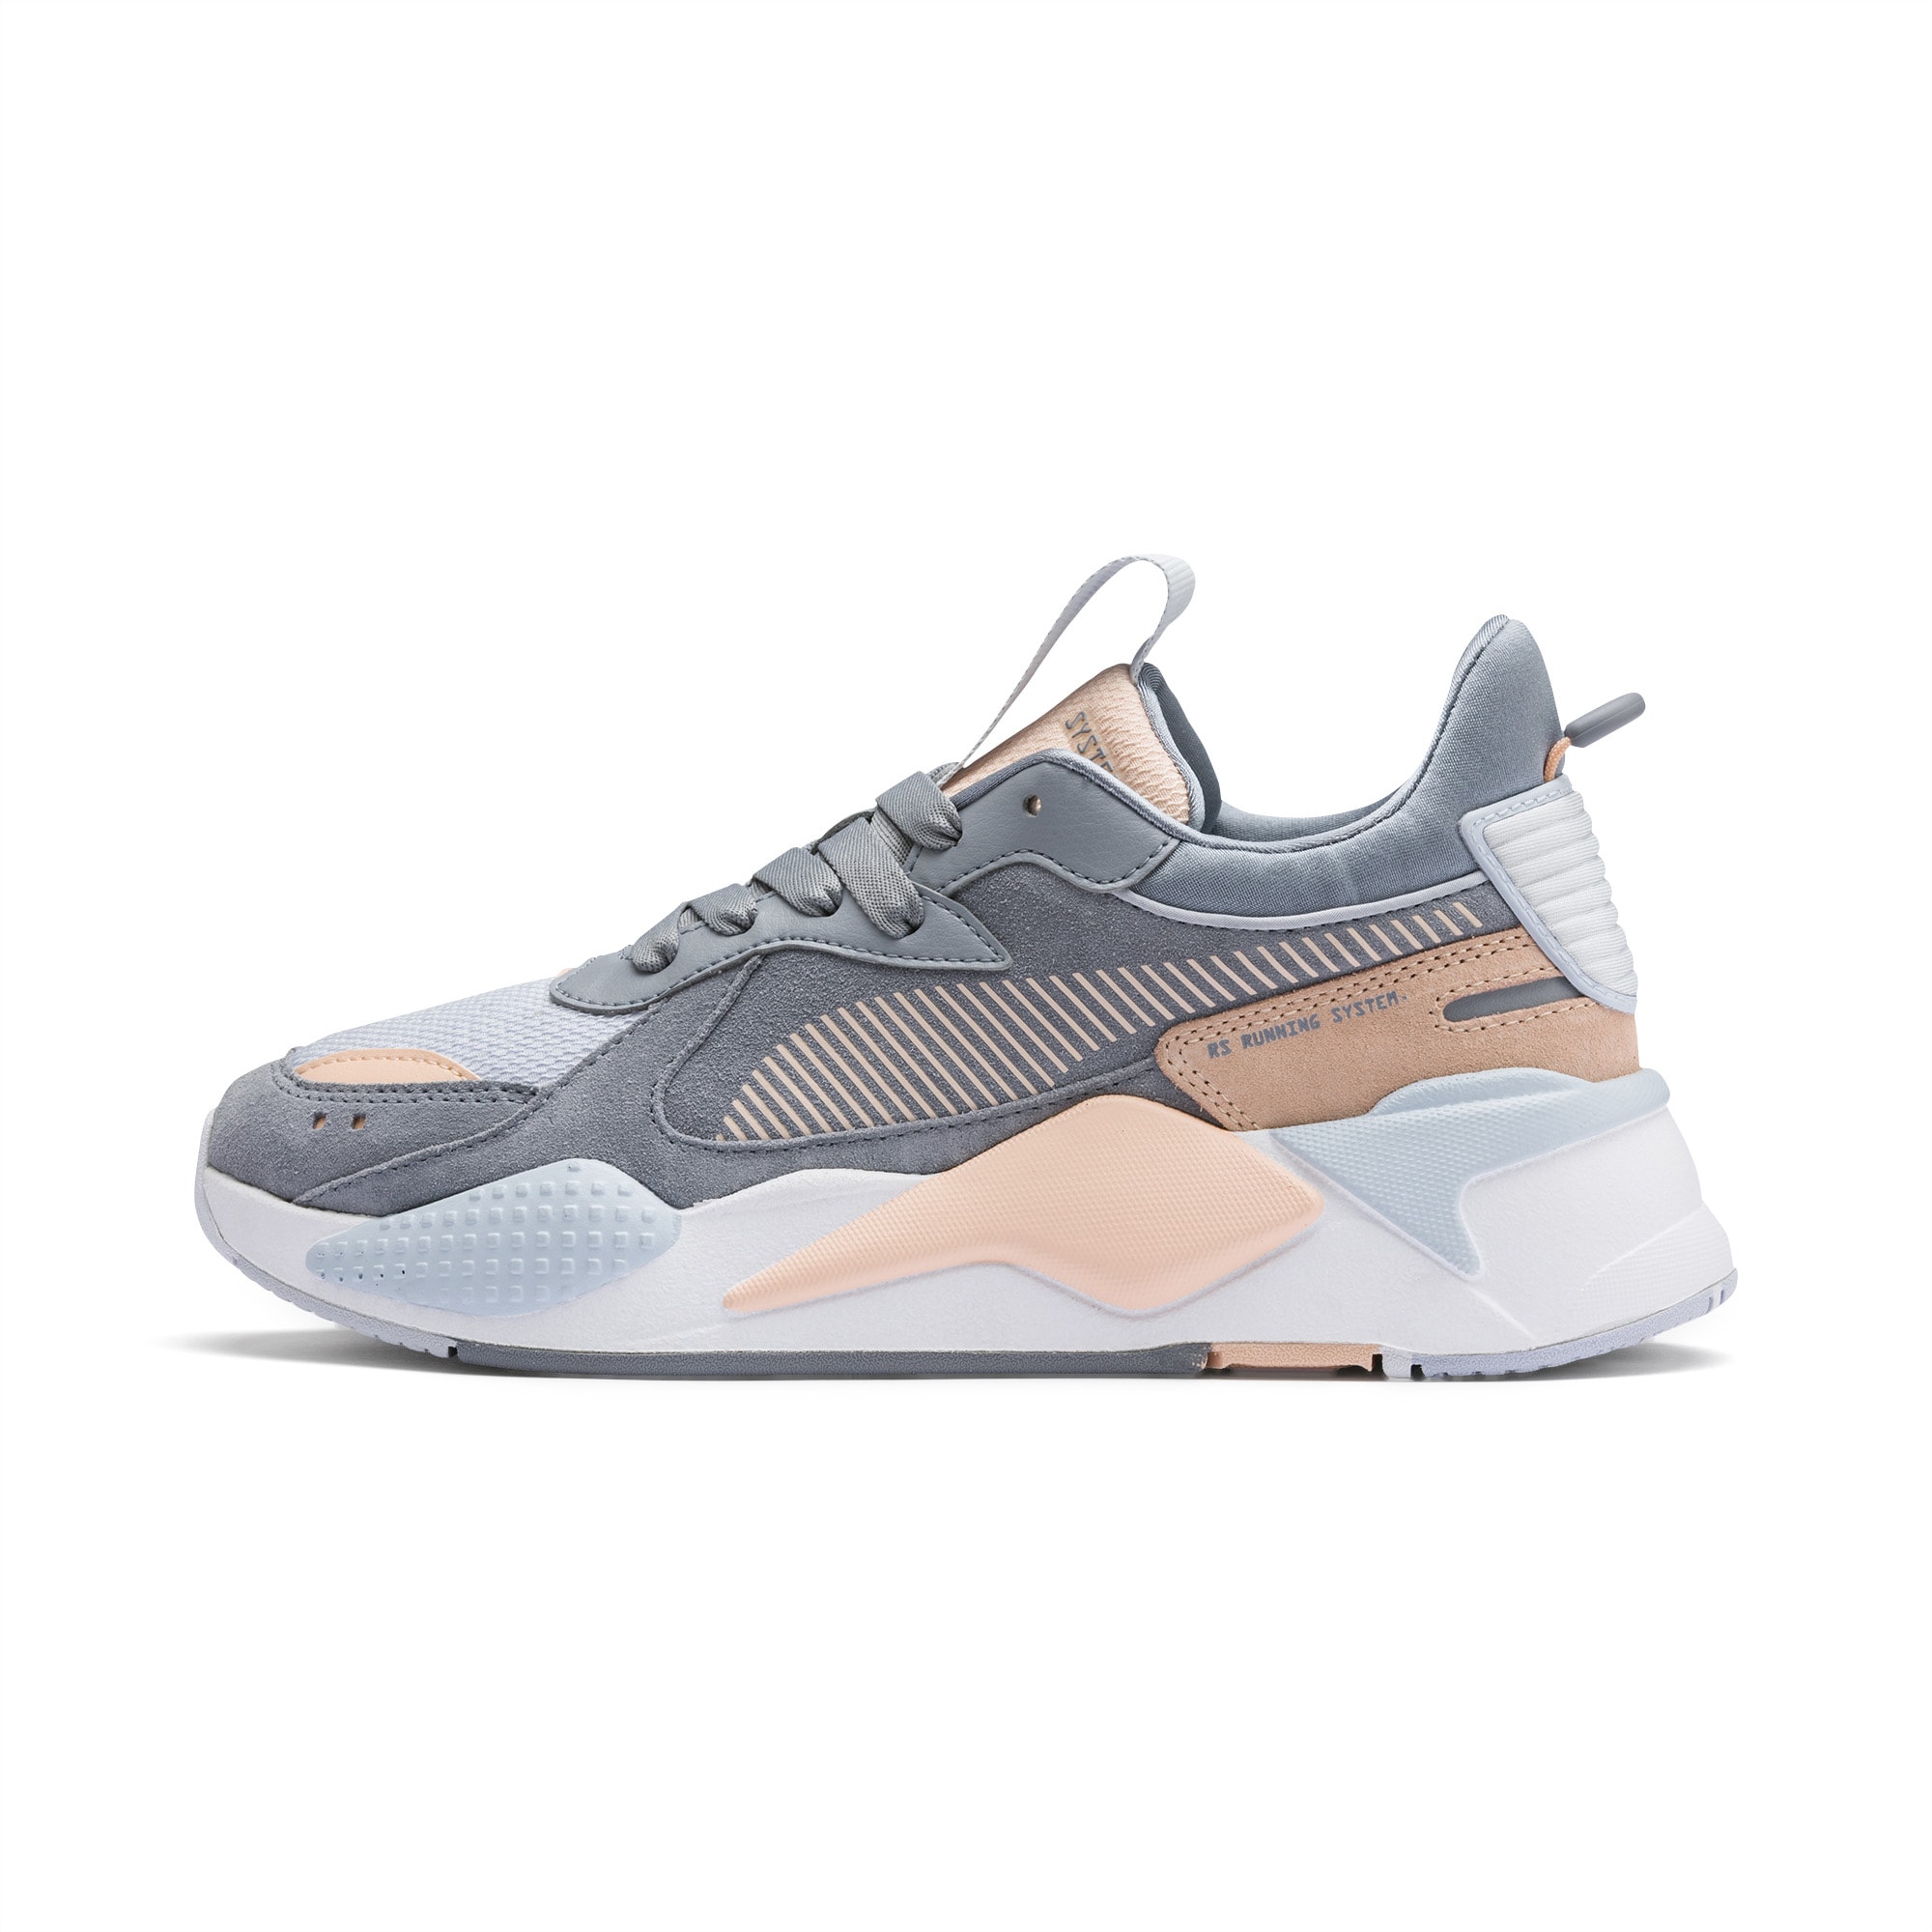 RS-X Reinvent Women's Sneakers | PUMA US